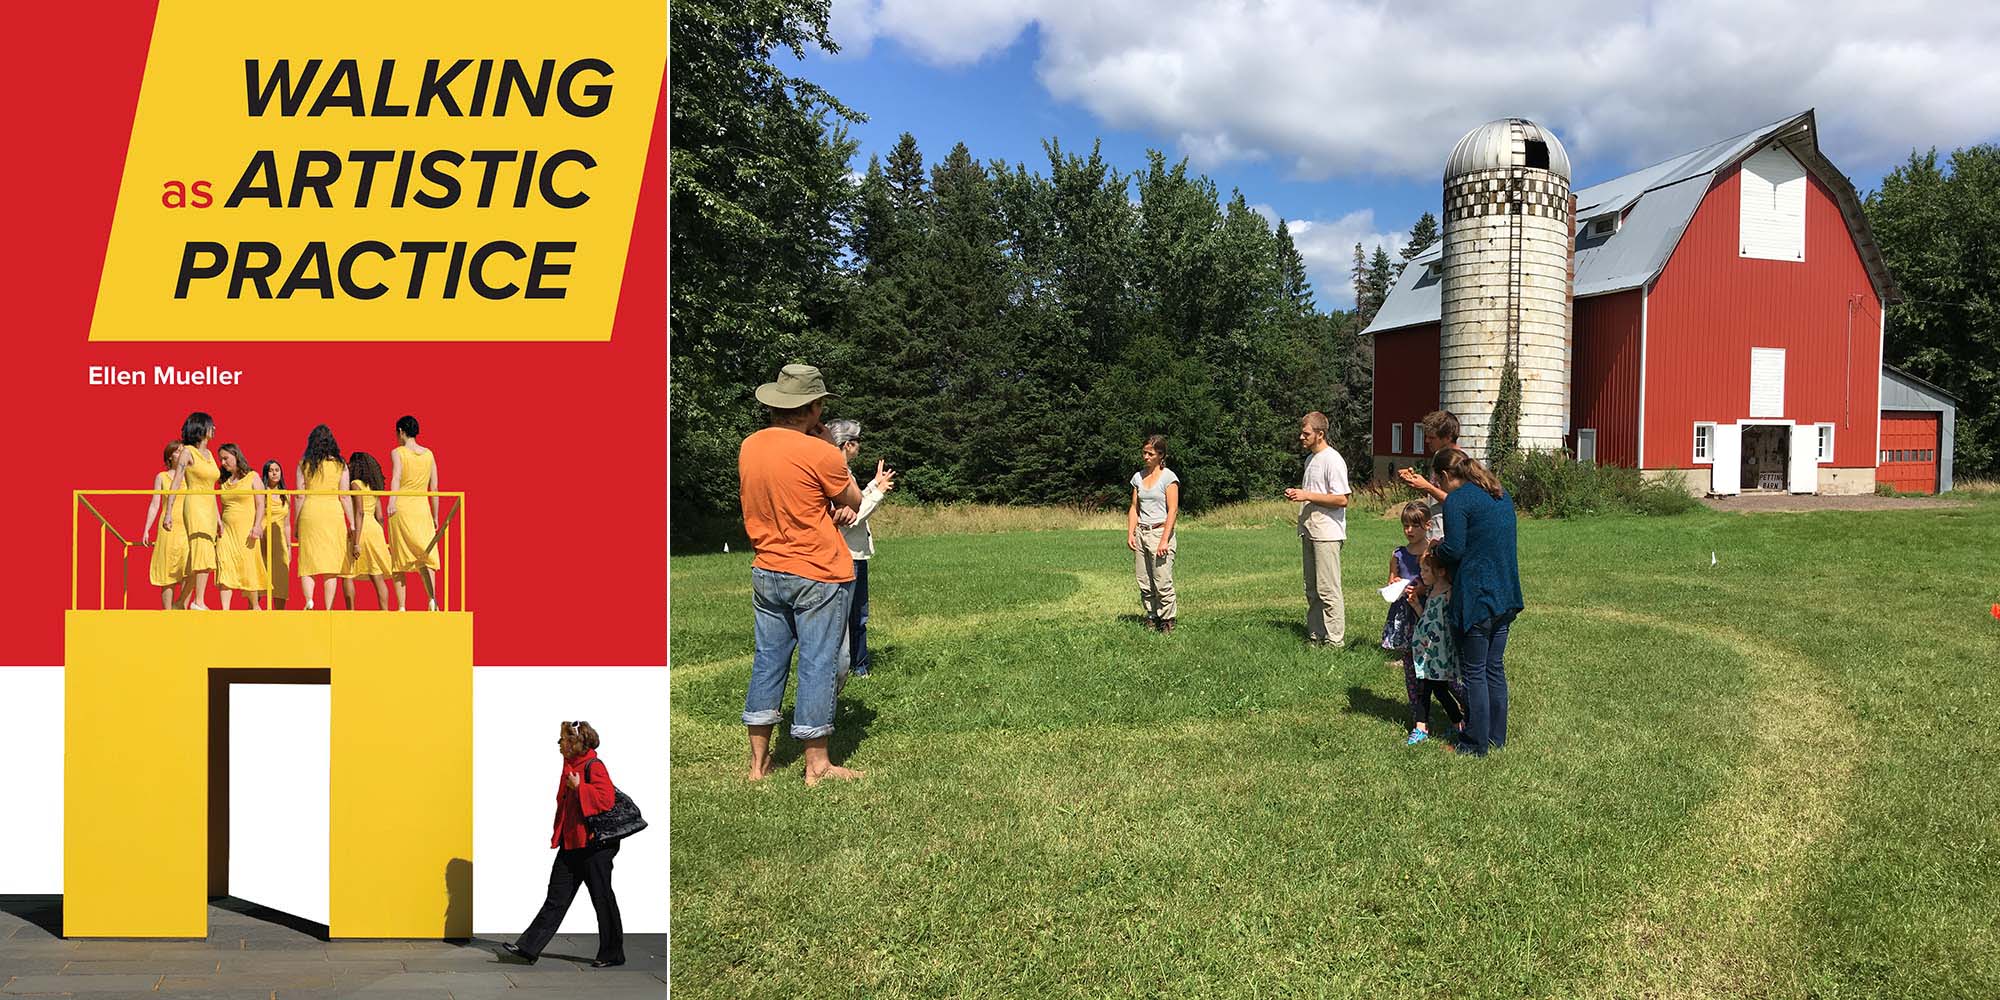 Walking as Artistic Practice book cover and image of people standing in front of barn